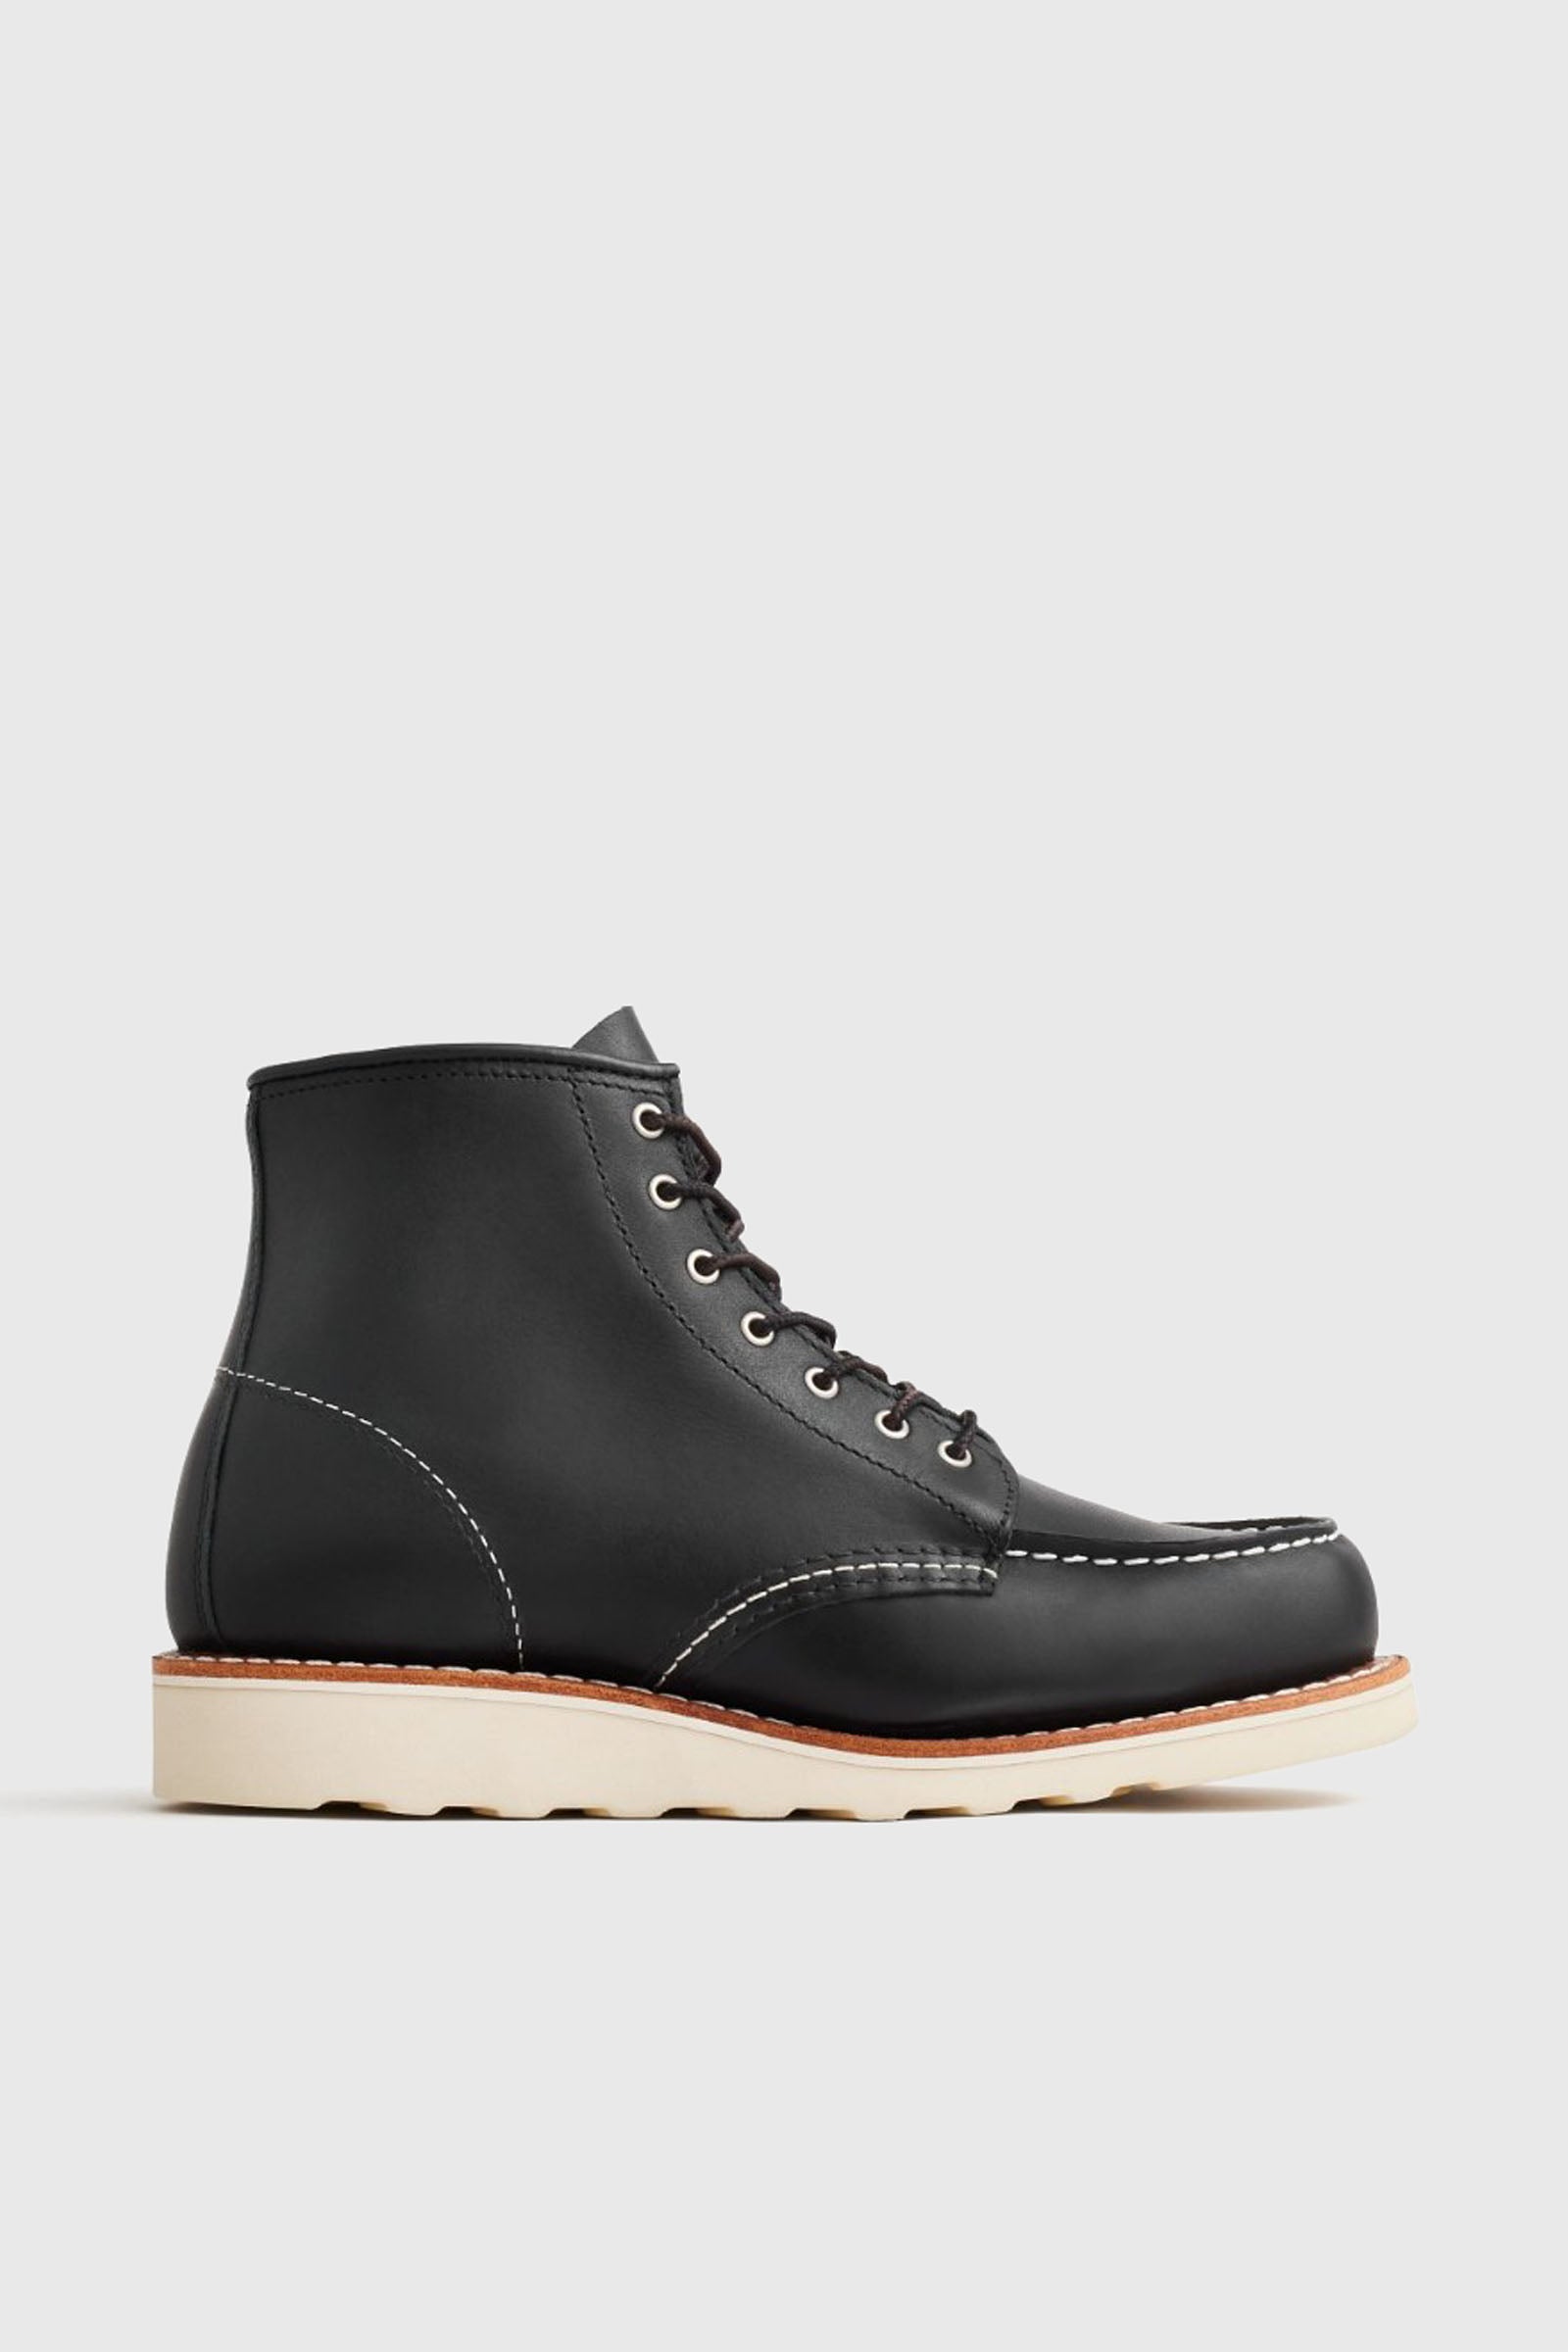 Red Wing 6-Inch Classic Moc Leather Boot in Black - 1